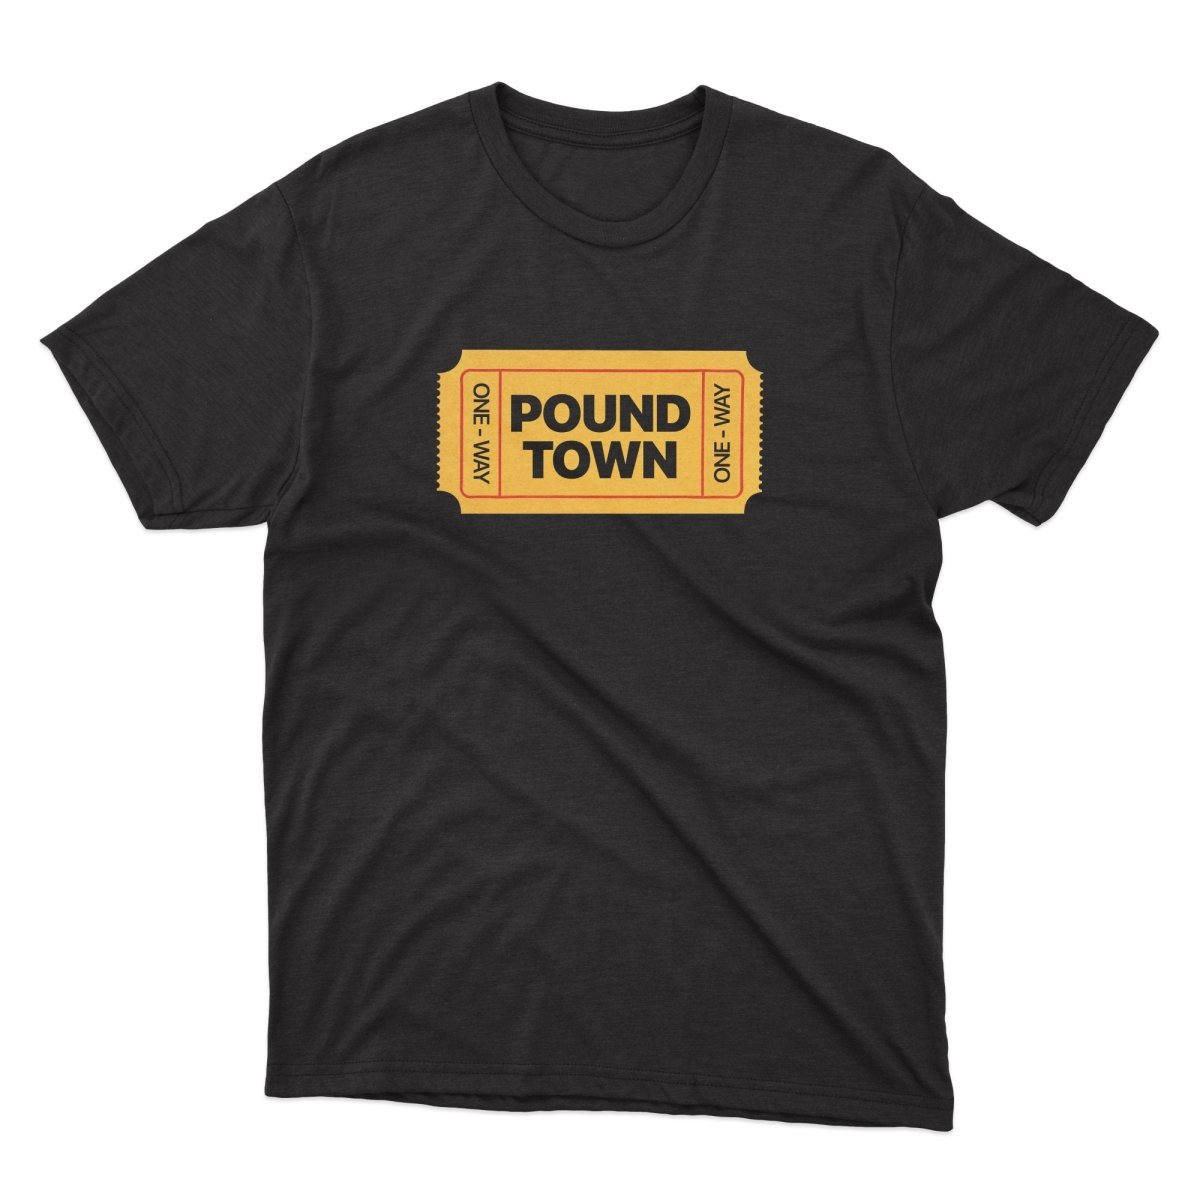 Ticket To Pound Town Shirt - stickerbullTicket To Pound Town ShirtShirtsPrintifystickerbull33321768840284990897BlackSa black t - shirt with the words pound town on it